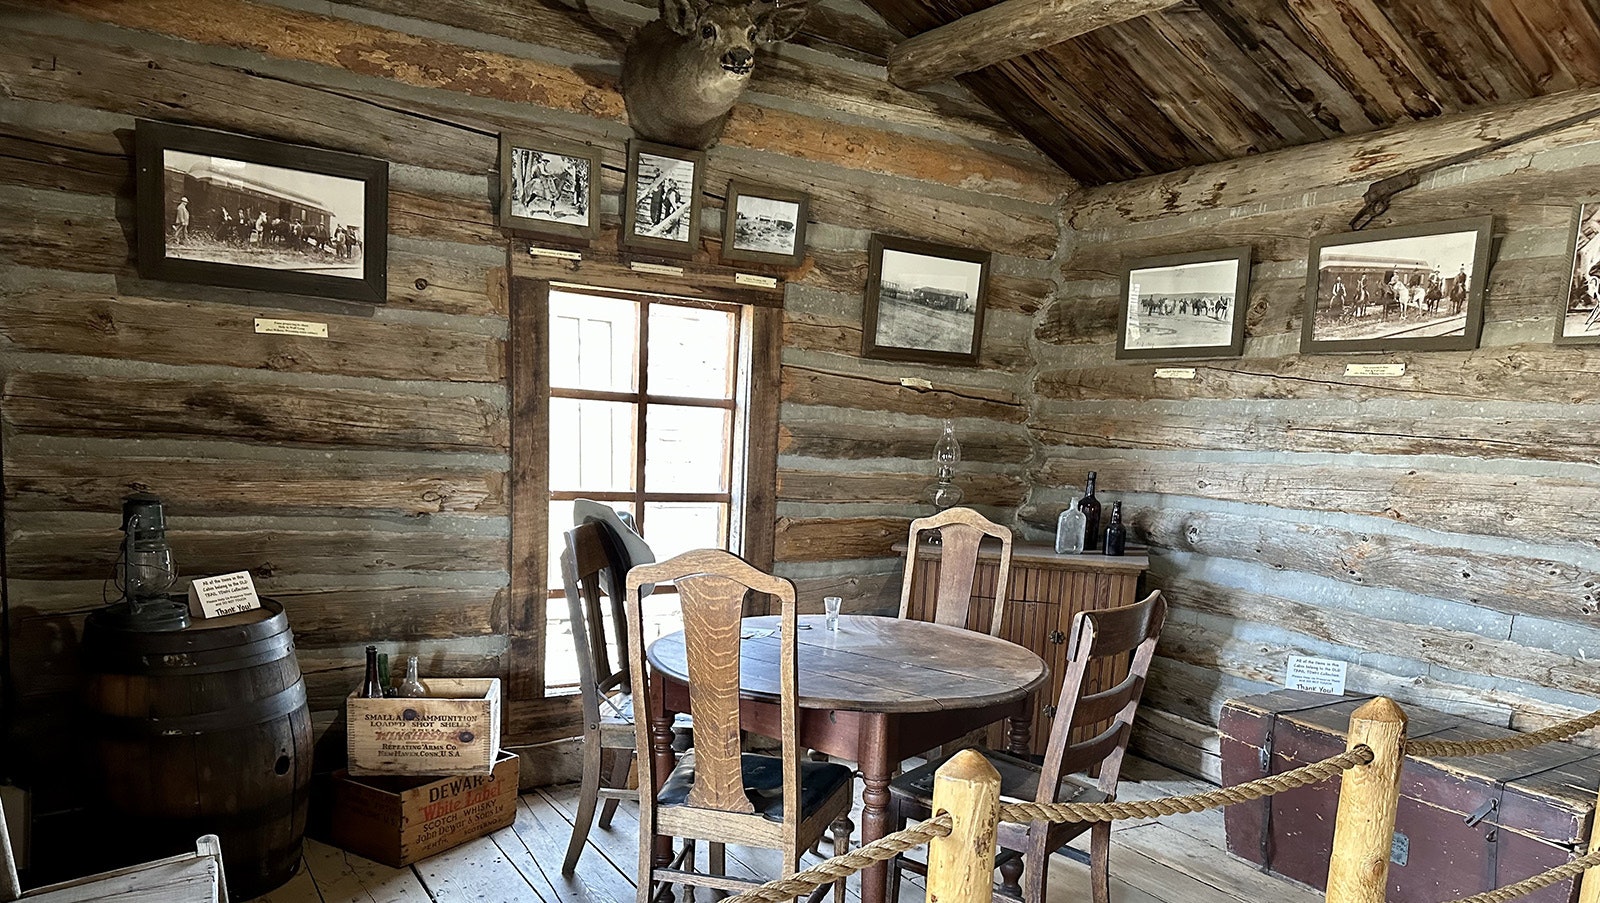 The interior of the Hole in the Wall Cabin at Old Trail Town. This two-room structure was a hangout and base-of-operations for Western outlaws, most famously Butch Cassidy and the Hole in the Wall Gang. It was moved to Cody from Buffalo Creek, Wyoming.